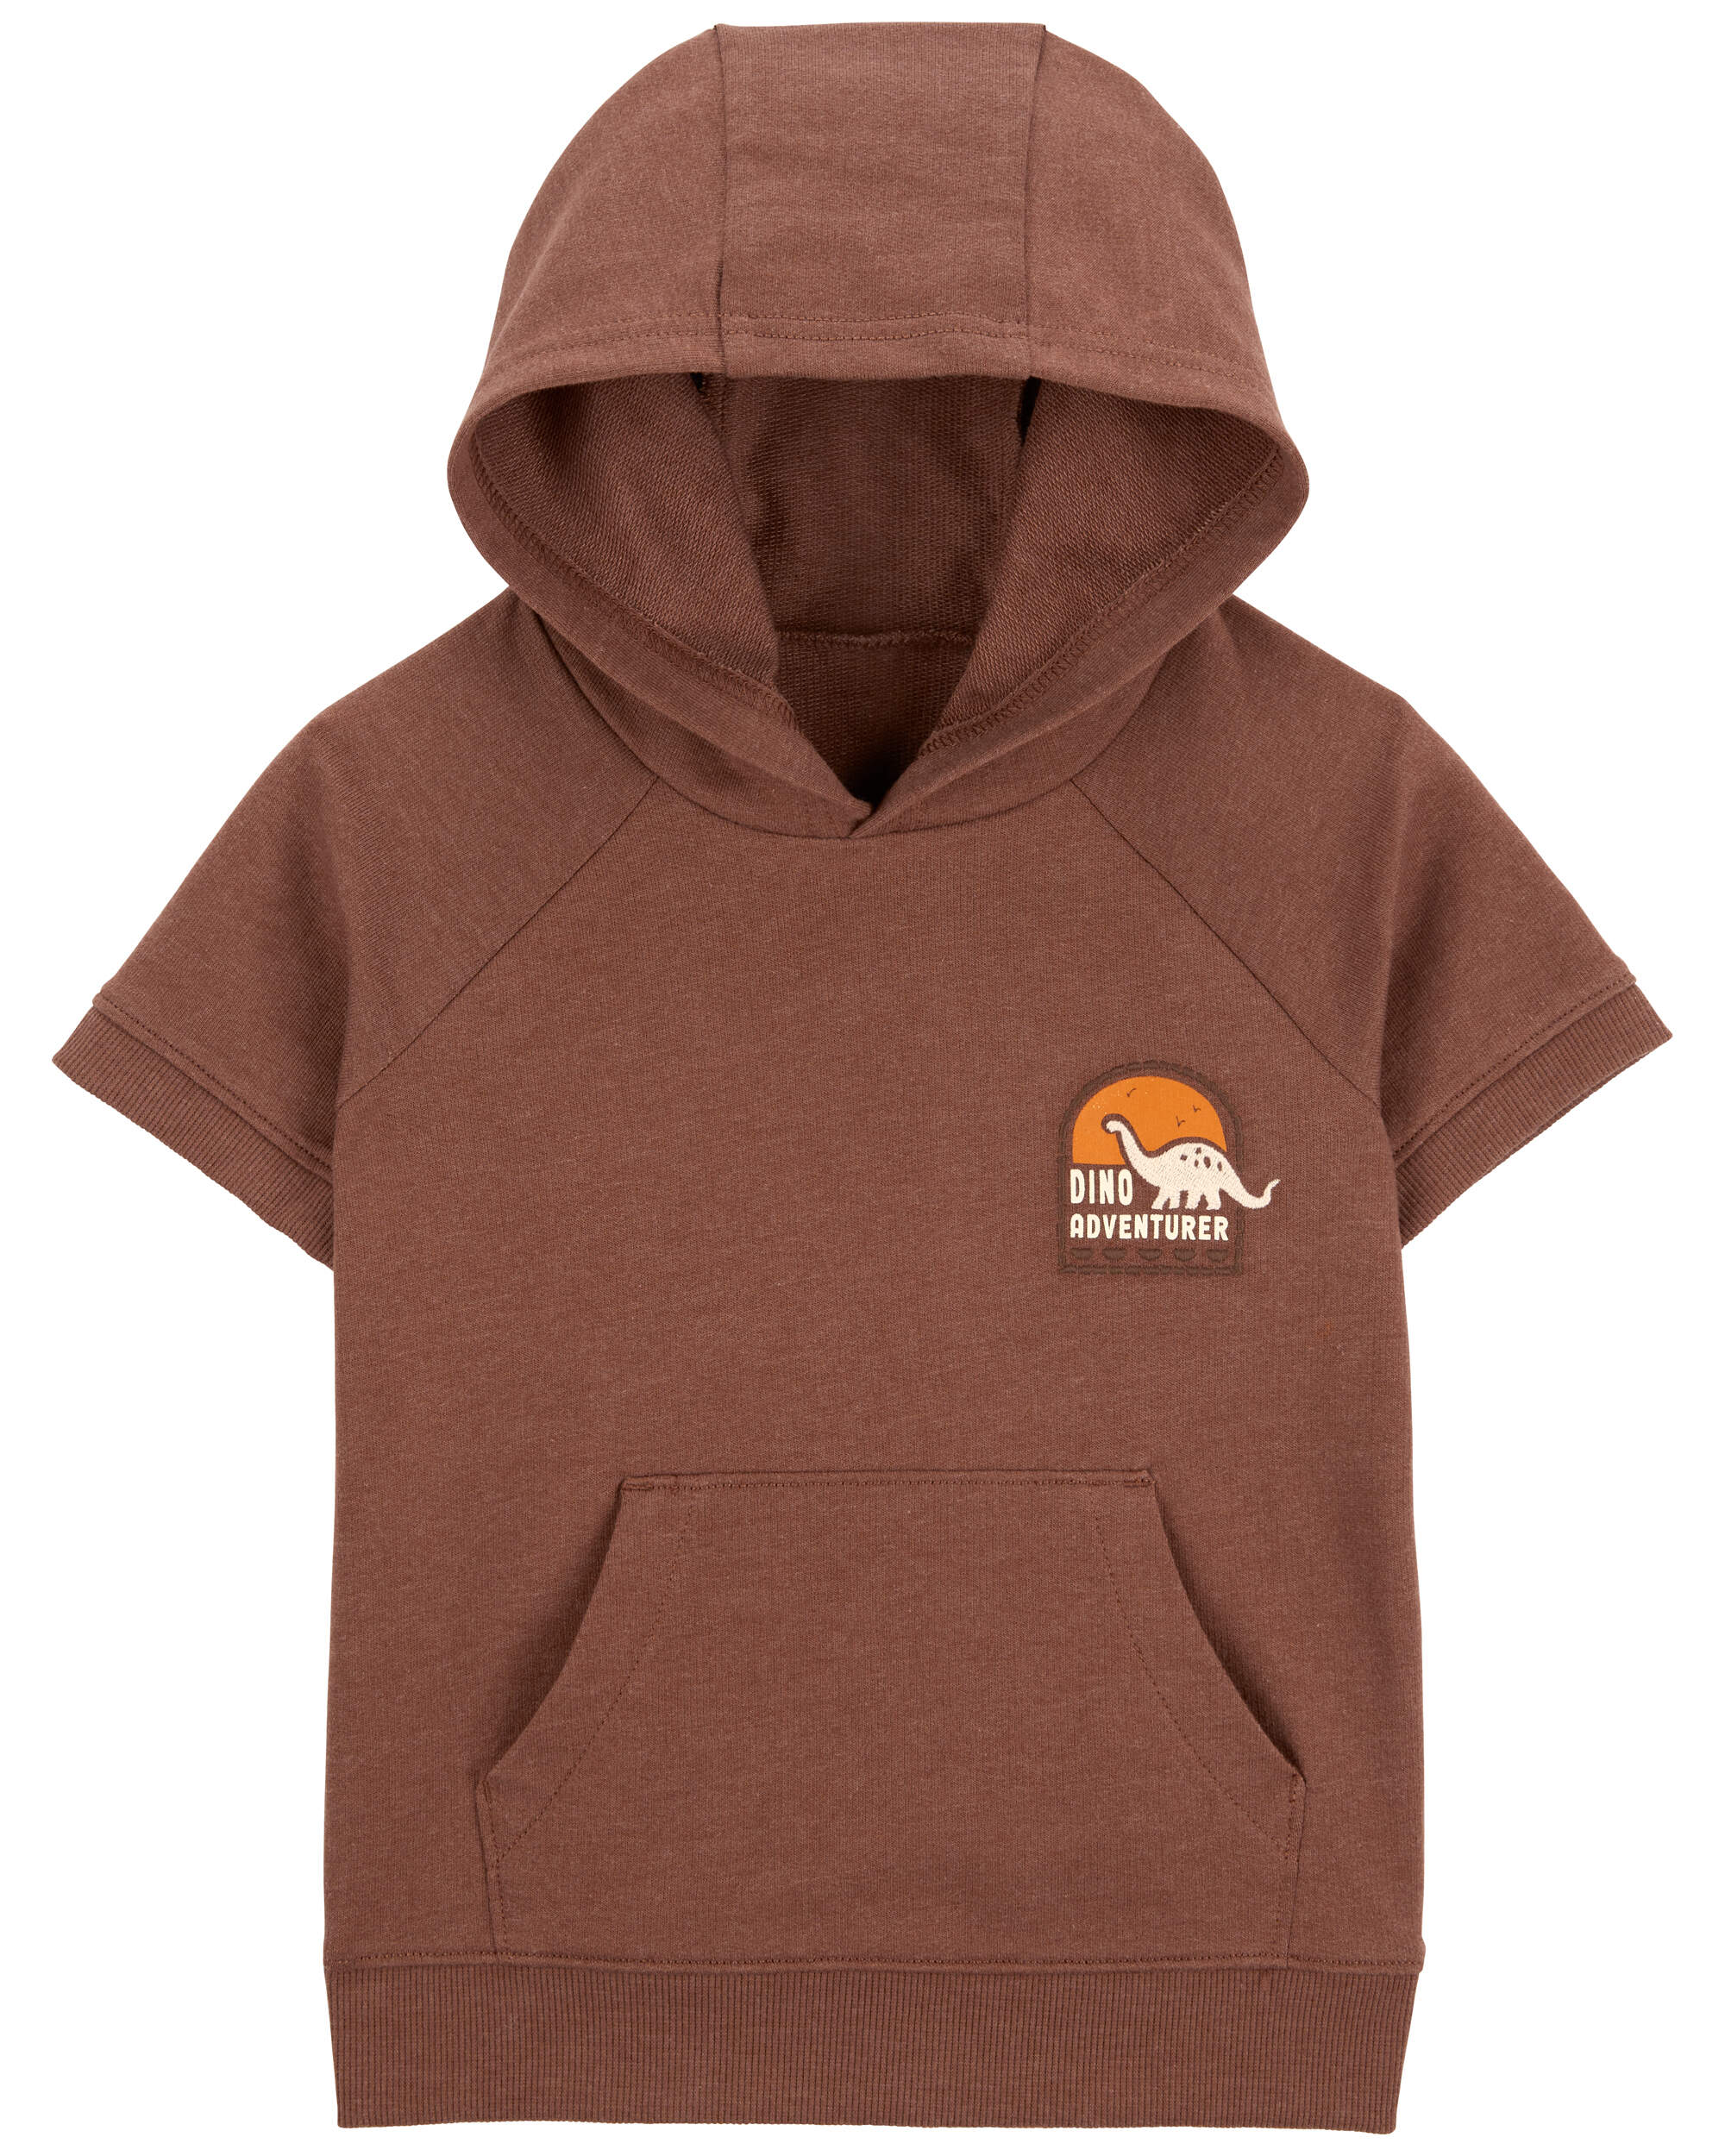 Toddler Hooded Dino Adventure Pullover